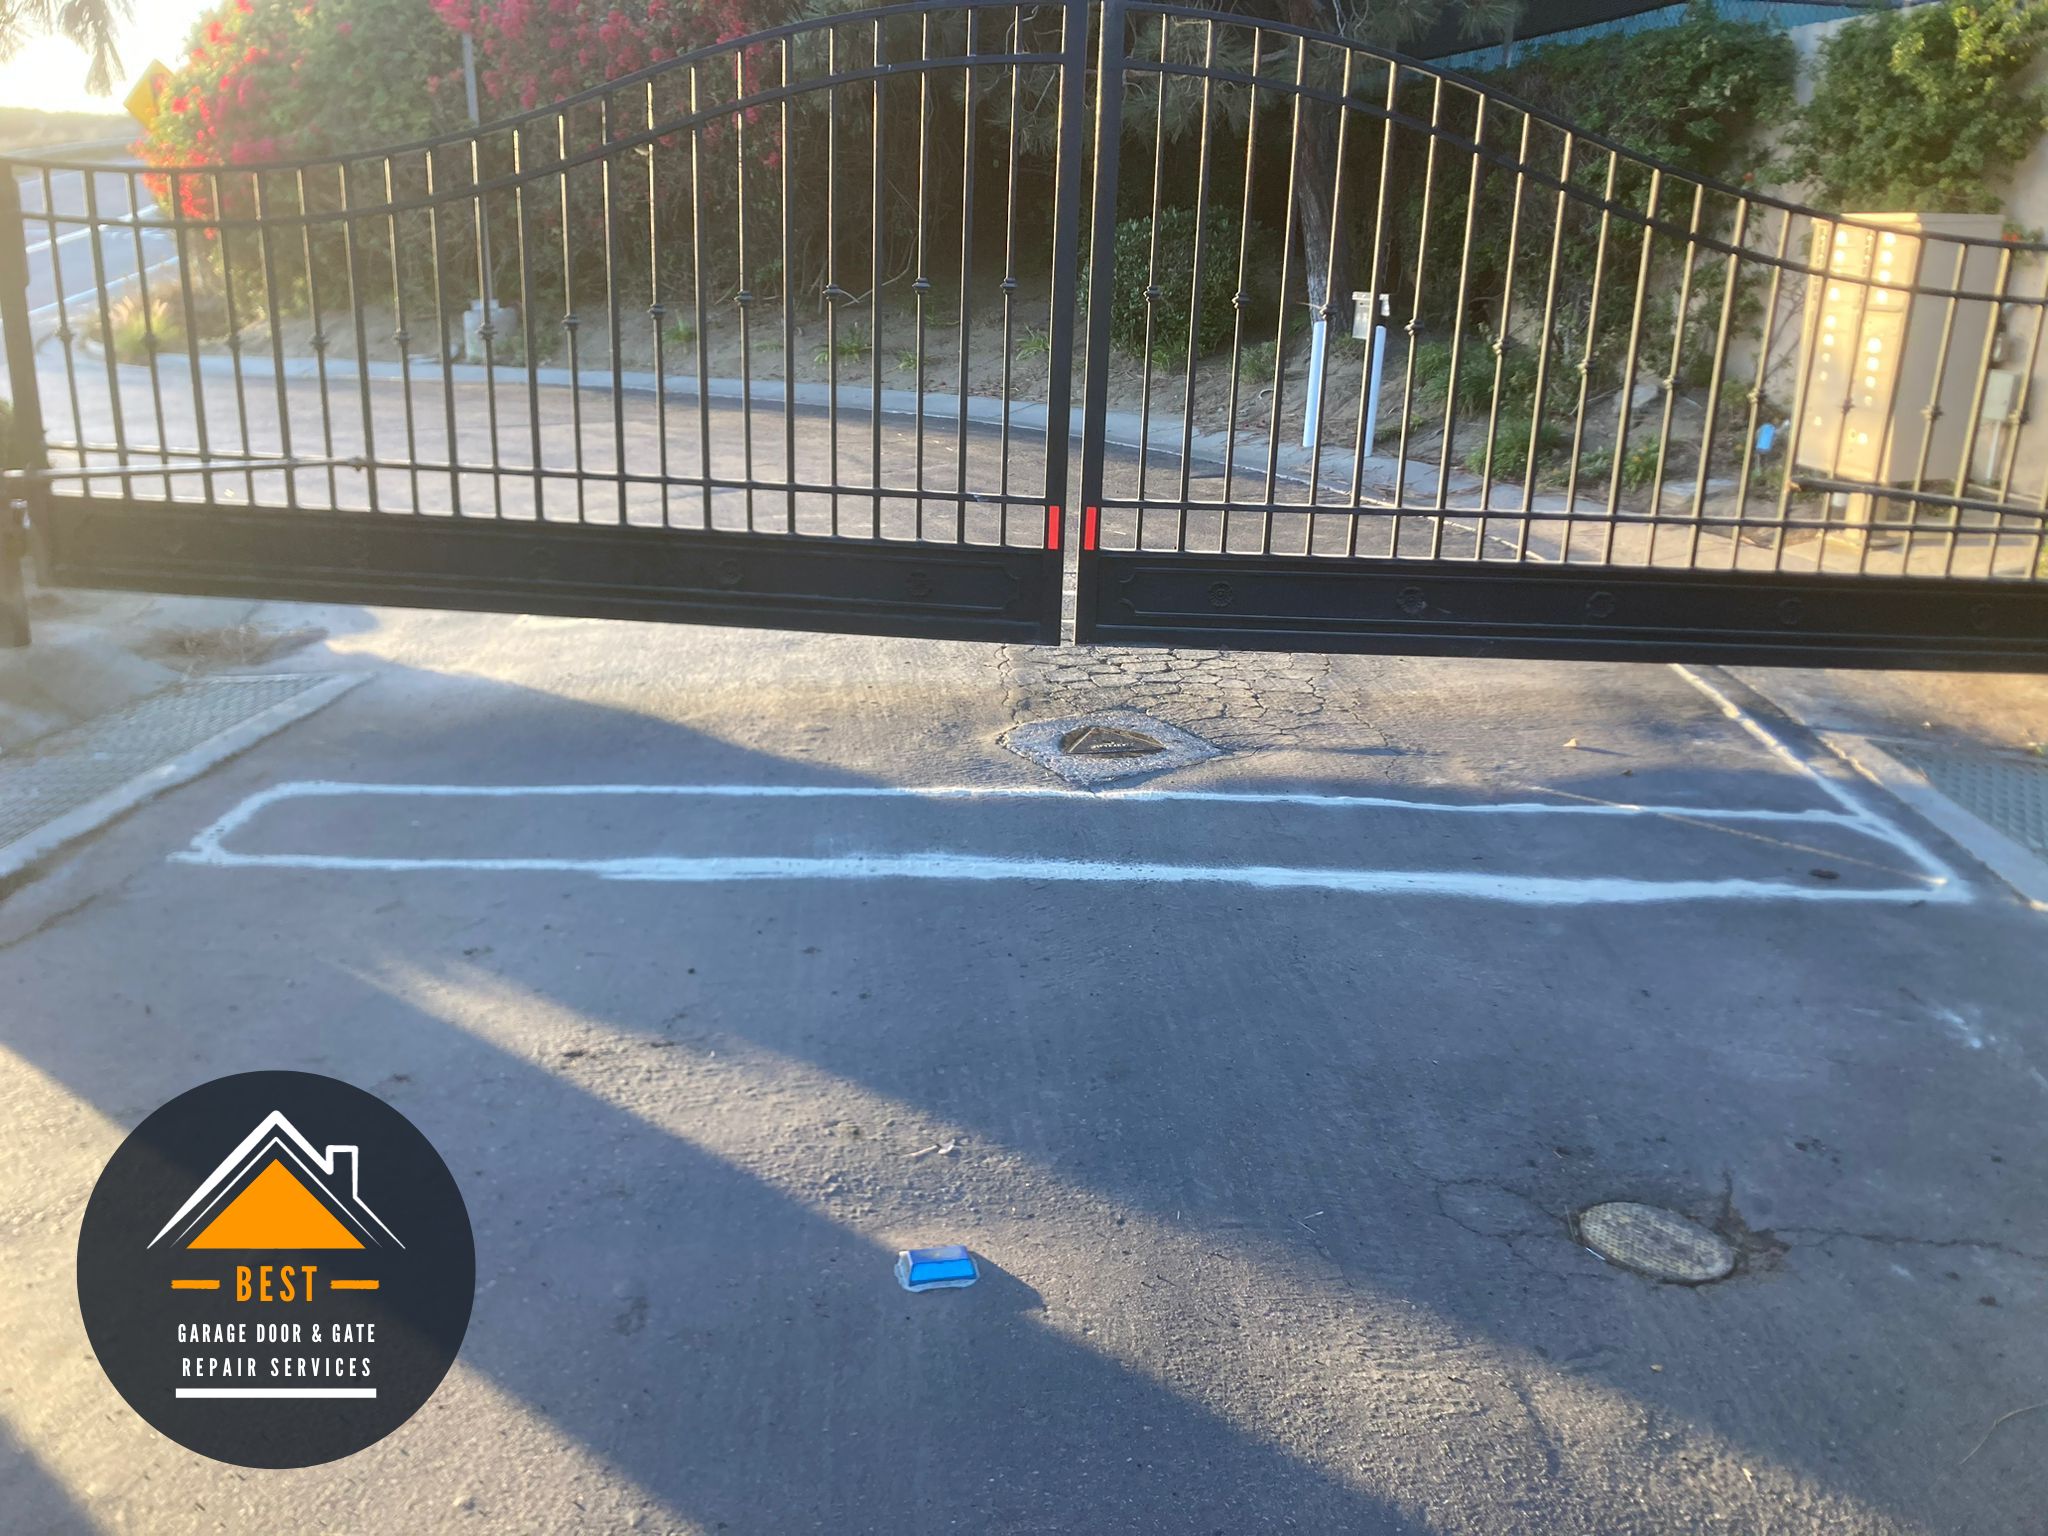 Bringing automatic gate system up to code to meet UL 325 universal codes. Replaced the DKS access control main board panel. Replaced exit and shadow loops with its loops detectors. Added new safety eyes sensors to ensure proper safety. Del Mar, CA 92014